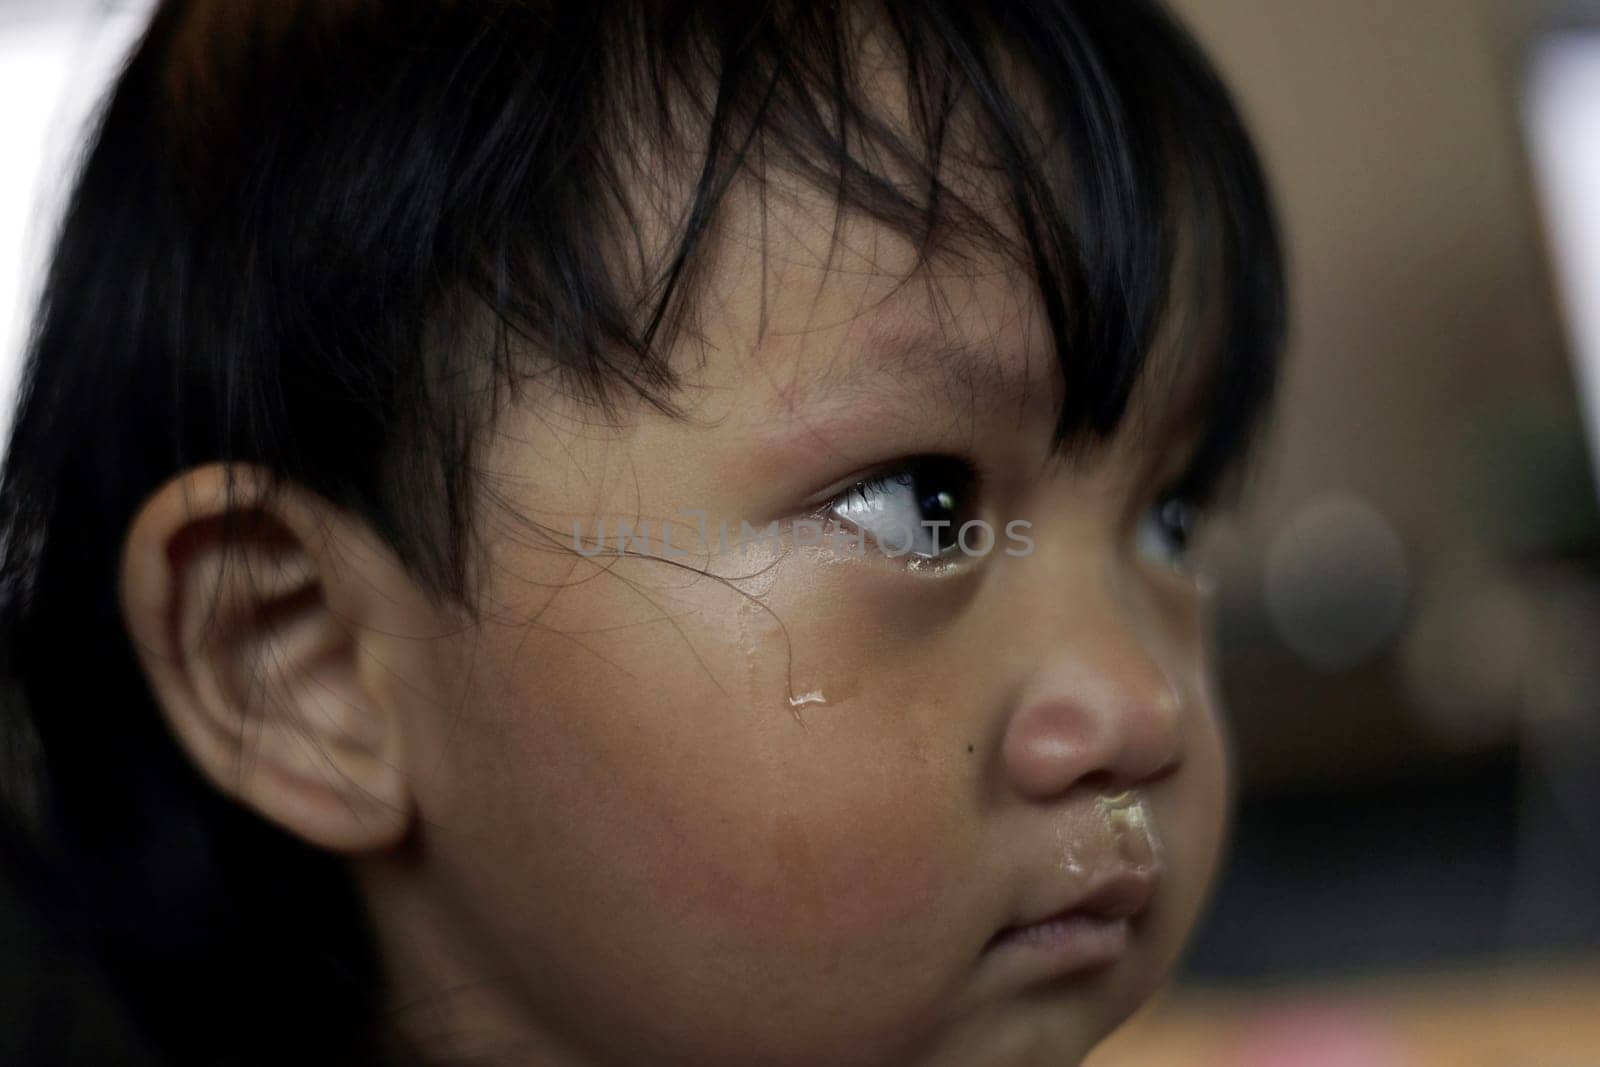 Crying boy with tear on cheek. Kid crying, focus on his tear.